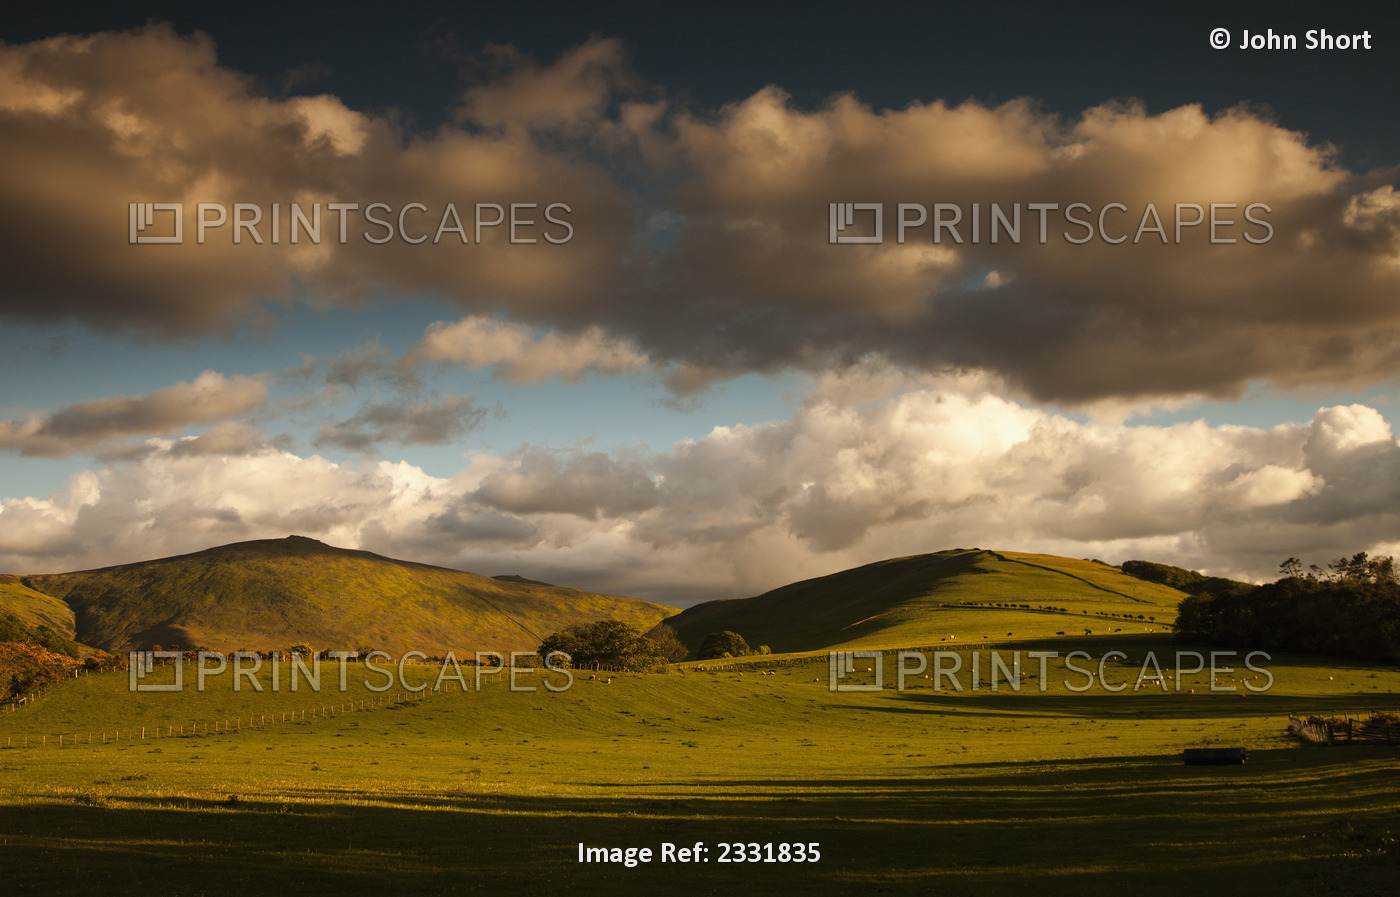 Clouds casting shadows on a hilly landscape with sheep grazing on the ...